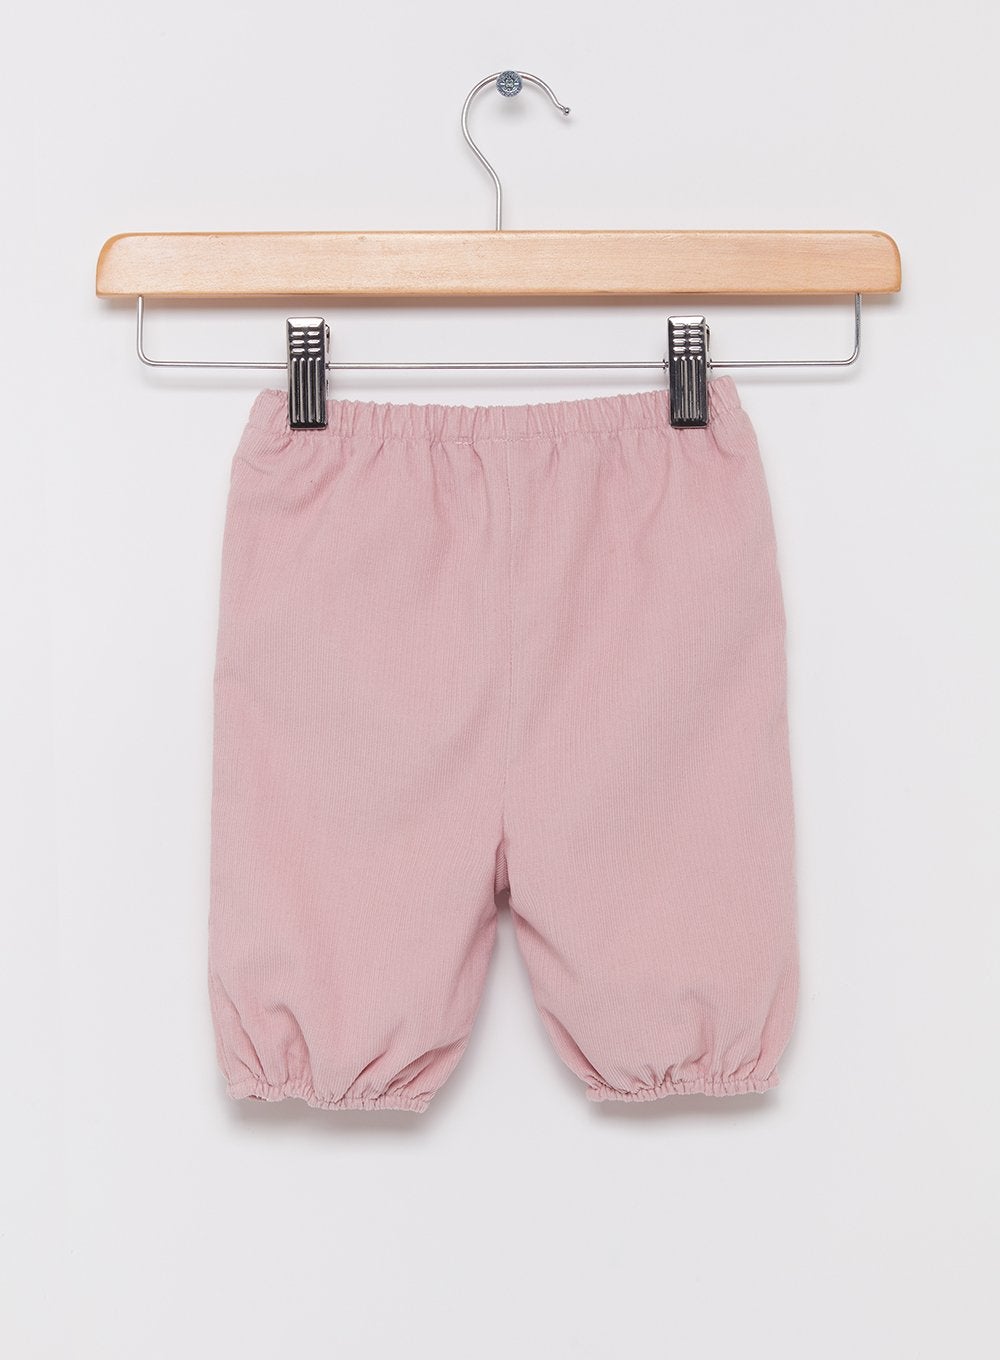 Lily Rose Bloomers Little Beth Bow Bloomers in Pink - Trotters Childrenswear